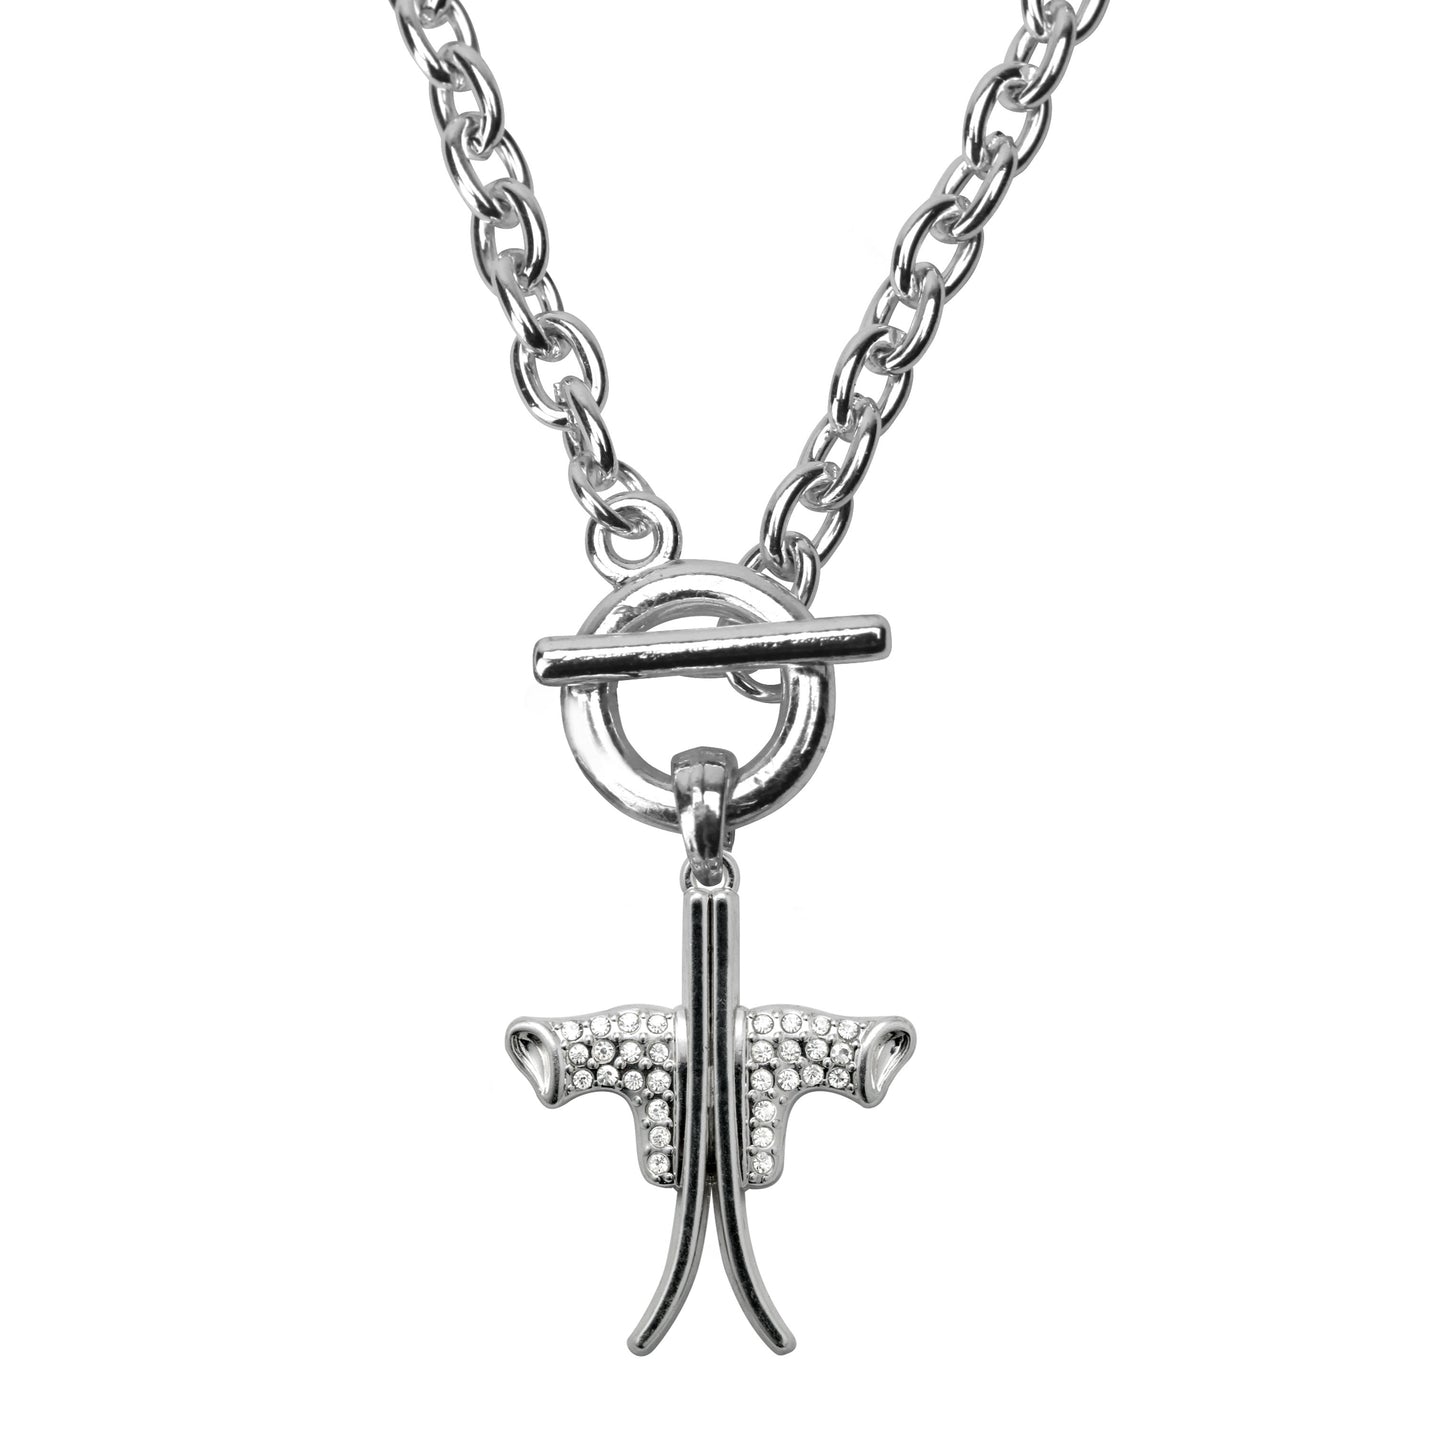 Silver Skiing Charm Toggle Necklace